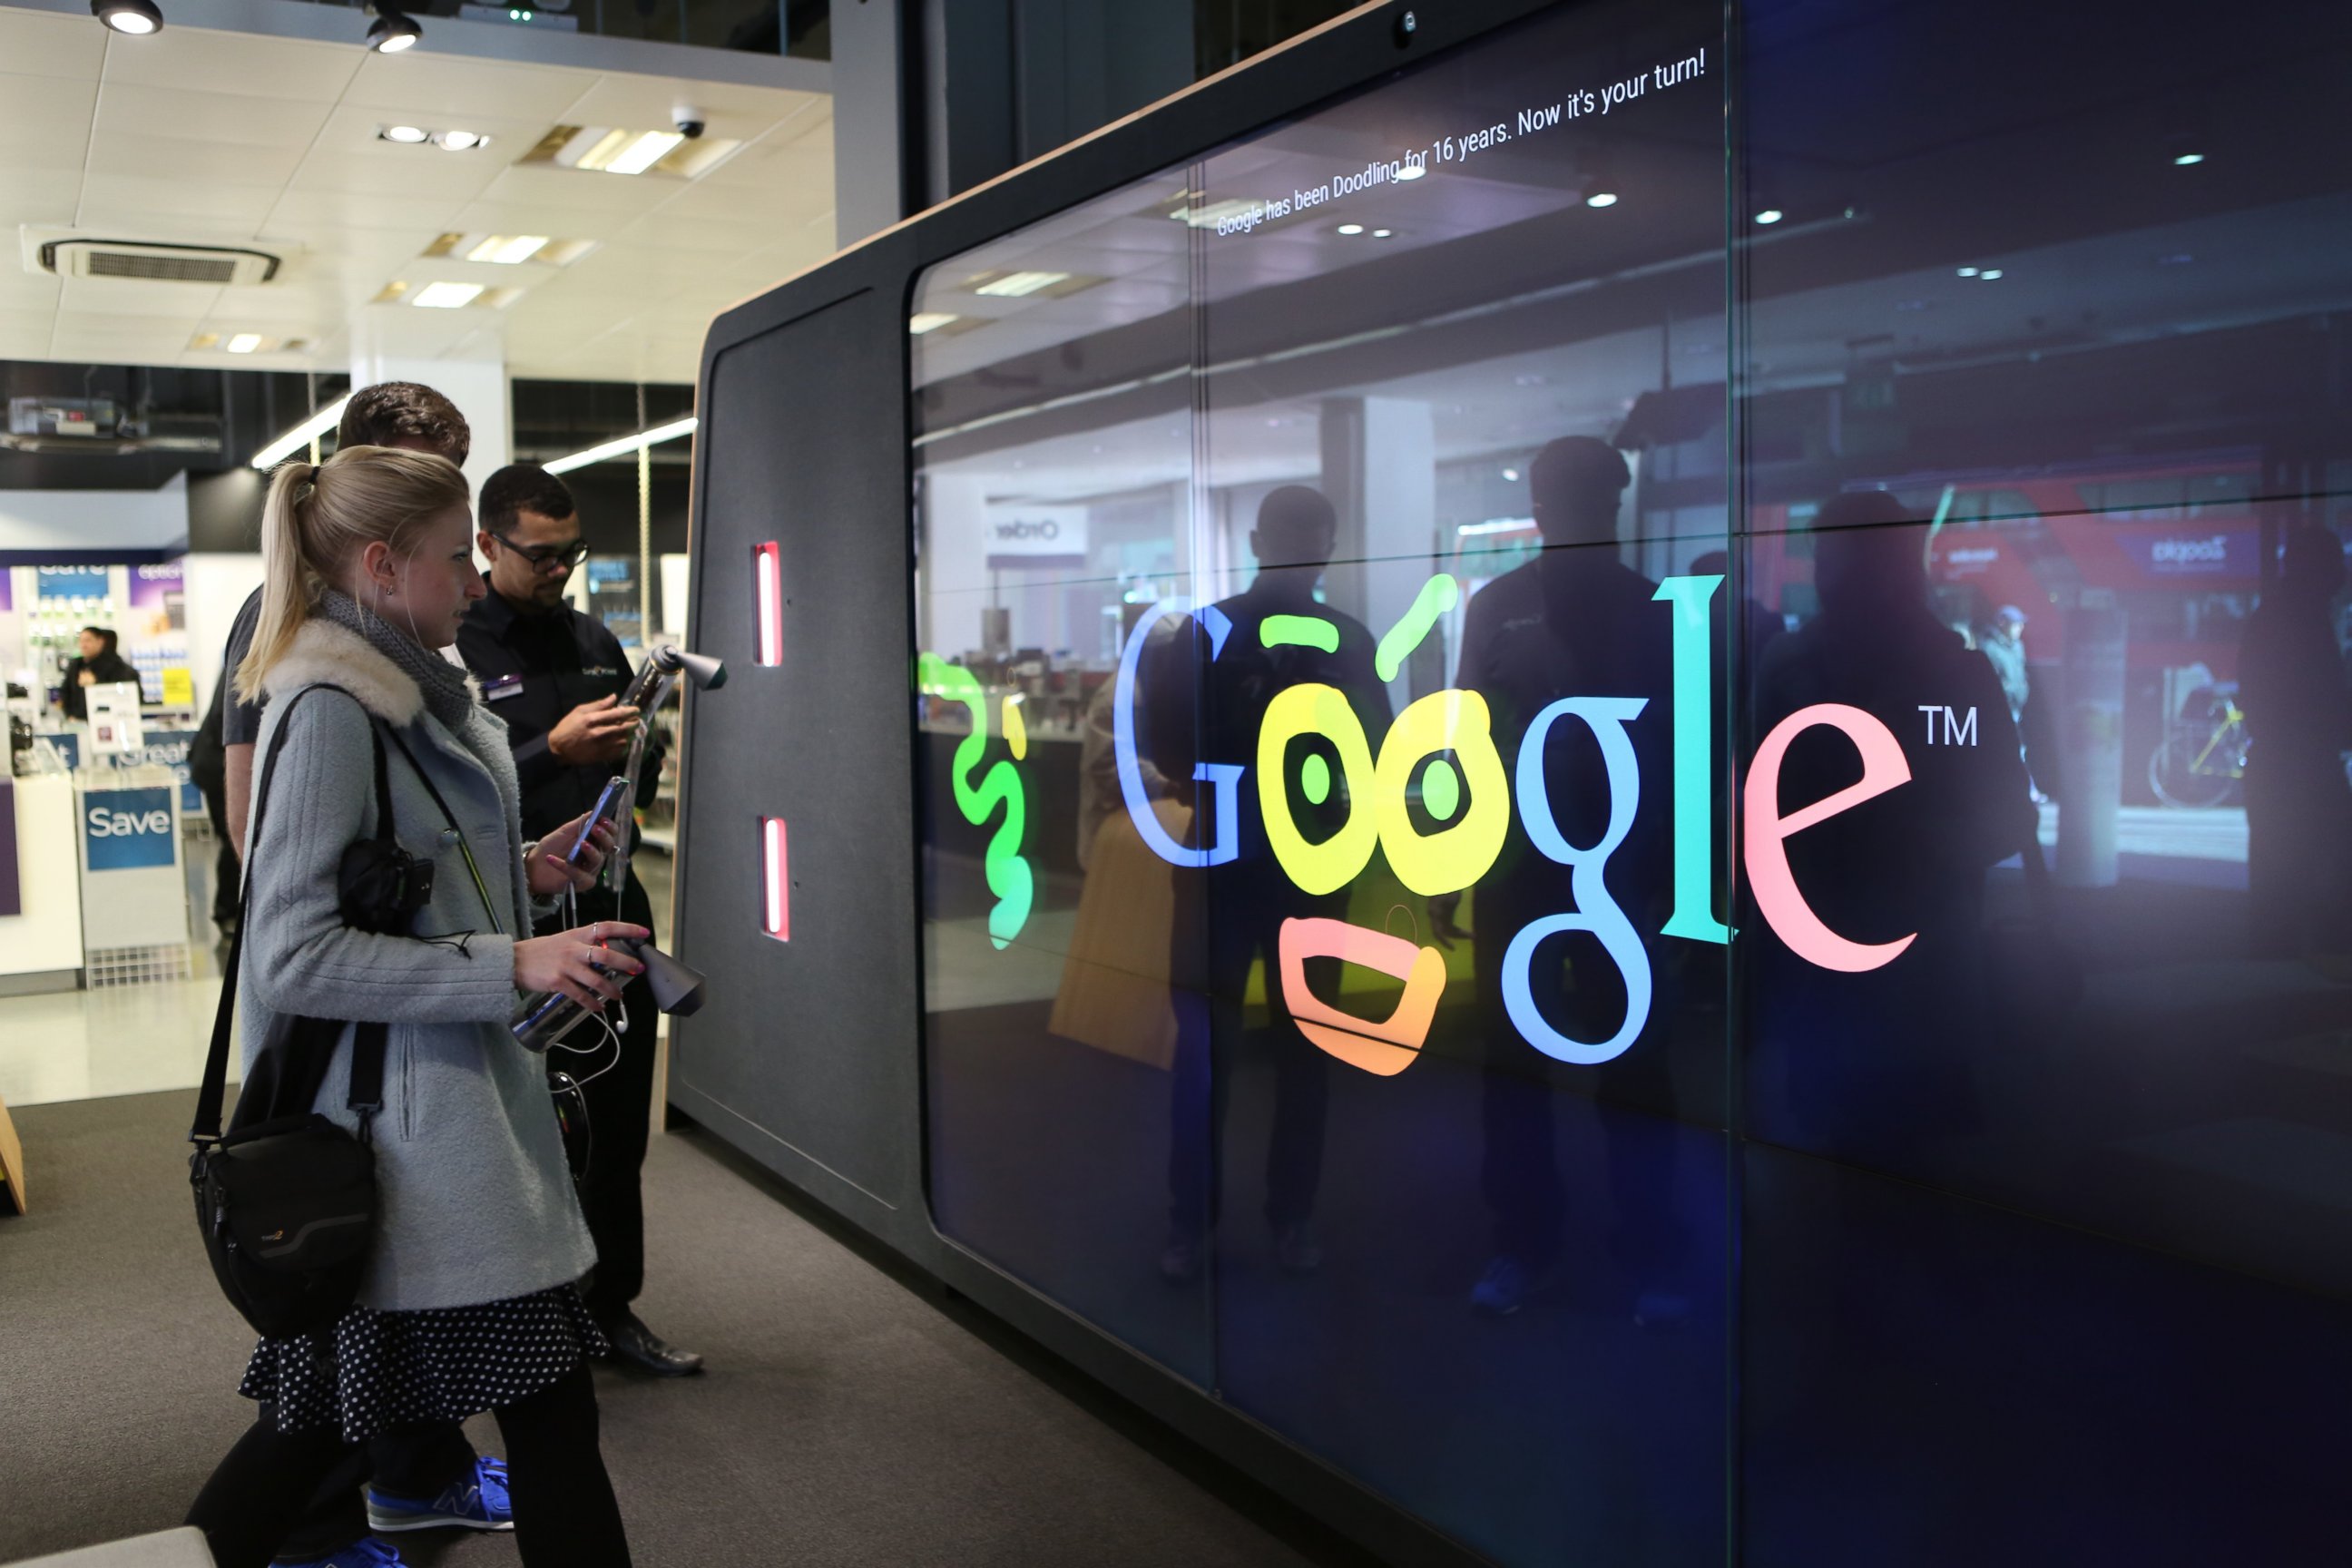 PHOTO: Google has opened its first branded store in London.